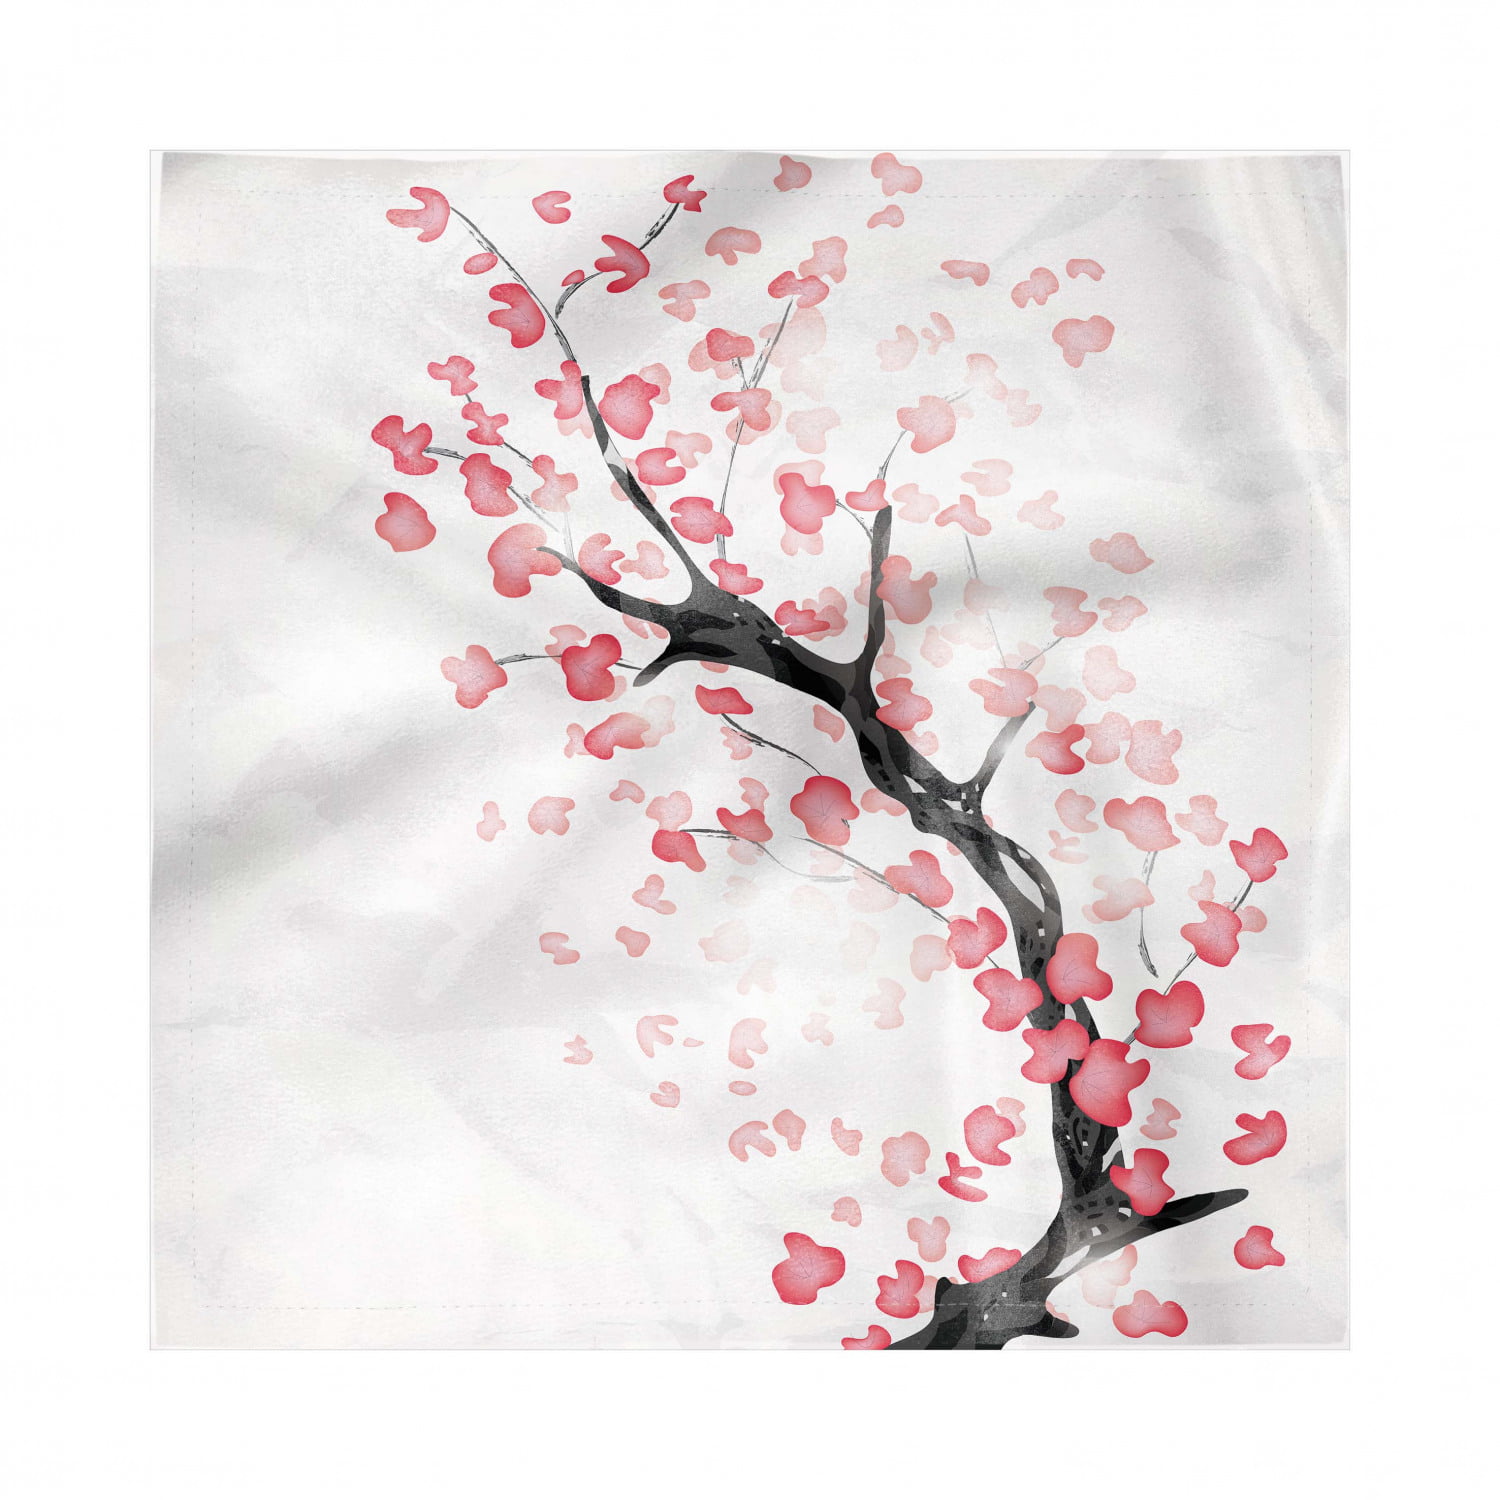 Ambesonne Country Place Mats Set of 4 Washable Fabric Placemats for Dining Room Kitchen Table Decor Multicolor Image Blooming Japanese Cherry Tree Sakura on The Lake Soft Romantic Culture Print